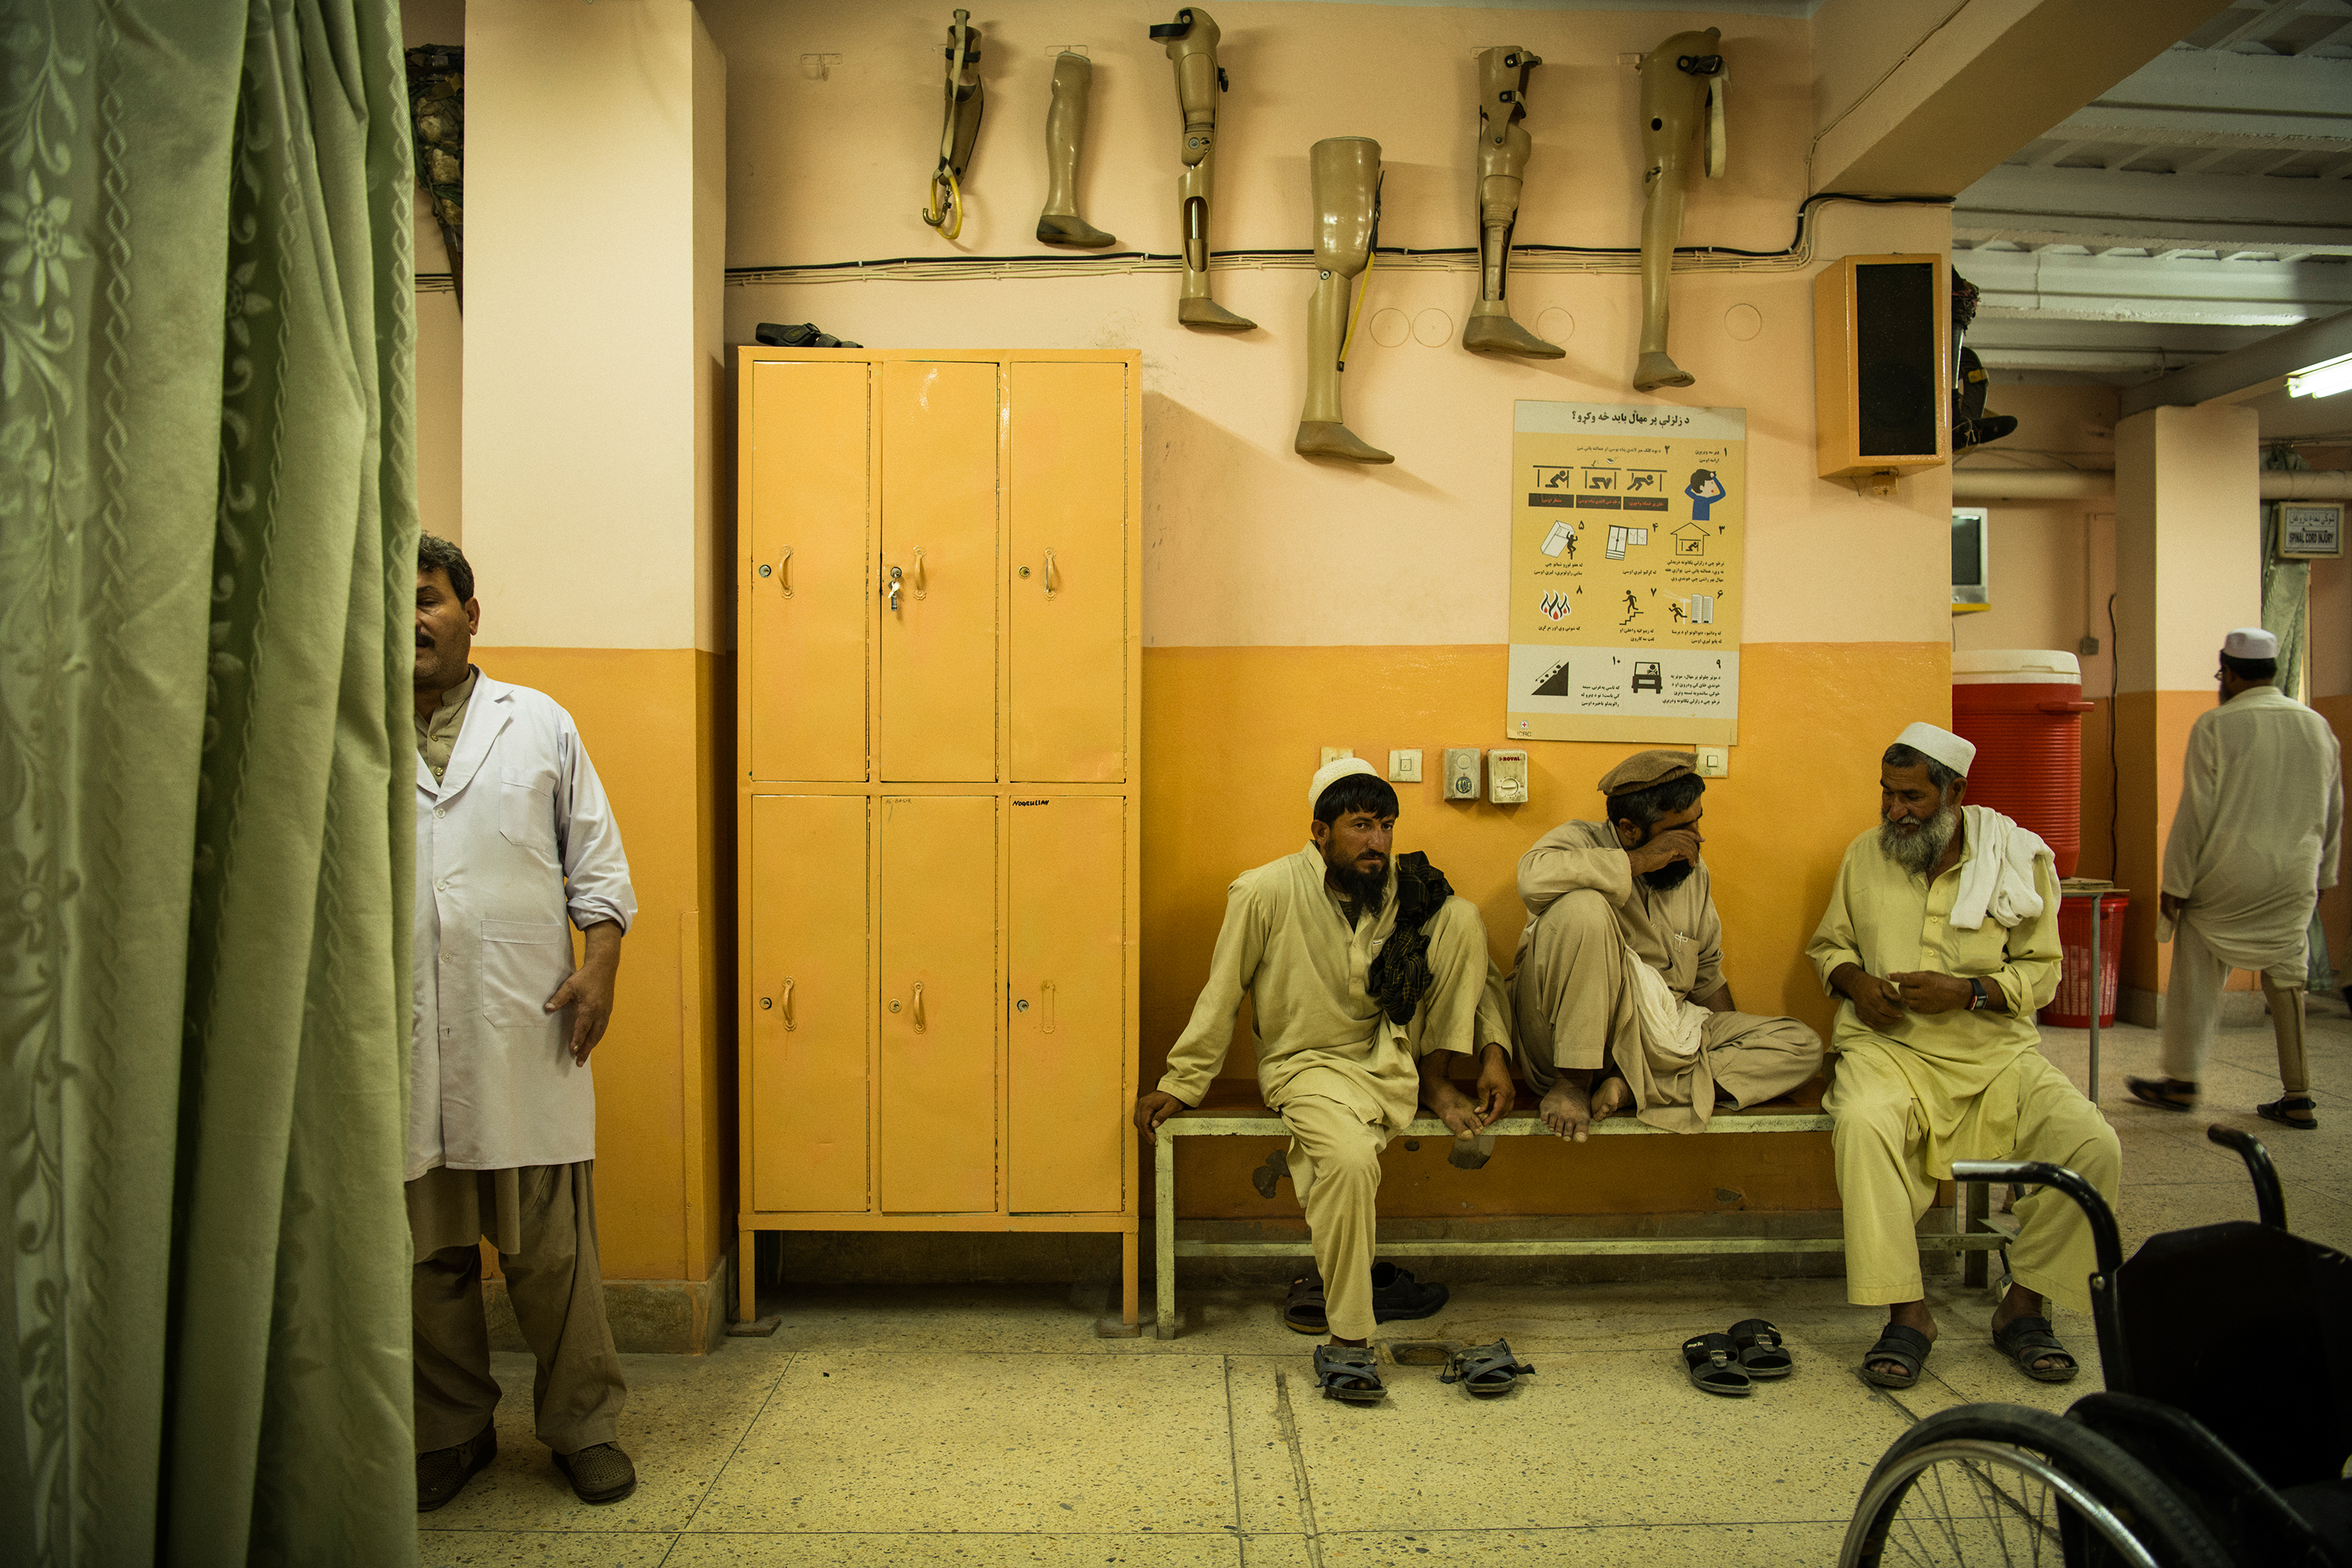 Hamisha Gul, right, at the orthopedic center in Jalalabad on June 27. In the center is Mohammad Hanif, Aman's father. (Andrew Quilty for TIME)